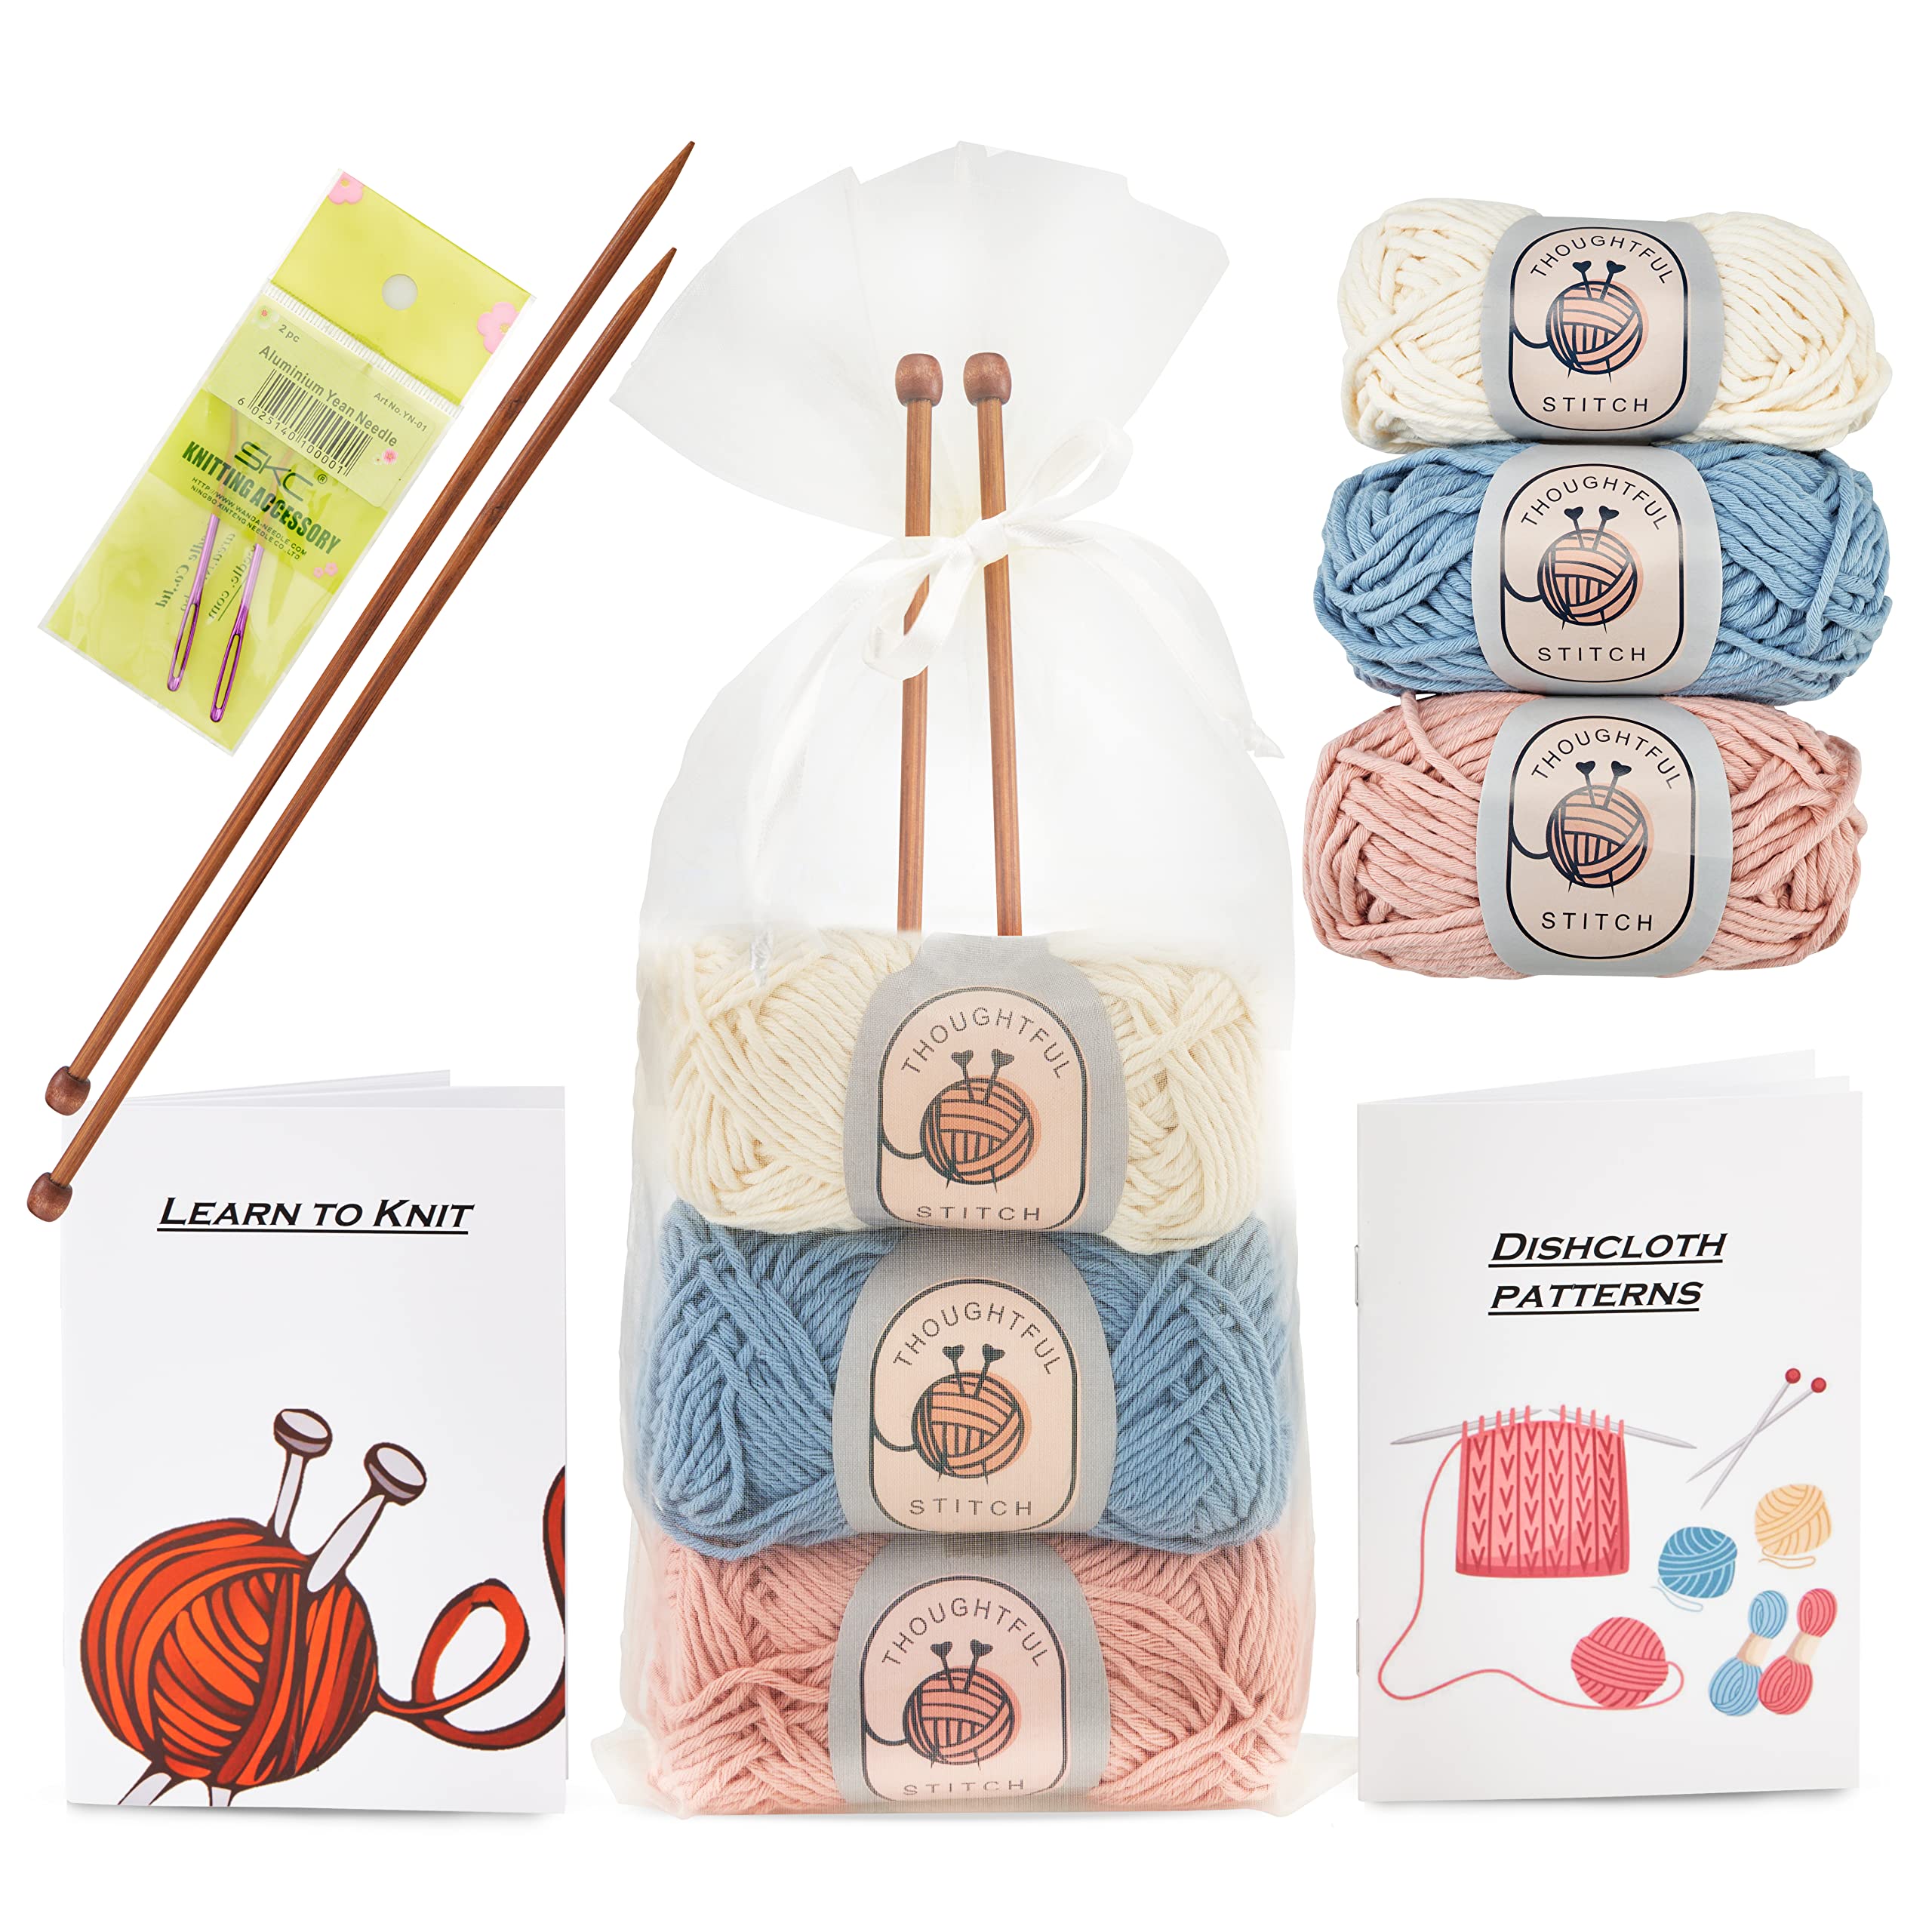 Knitting Kits for Beginners Adults 6 Pcs Knitting Needle Set with 100%  Cotton Yarn Make Your Own Dishcloth Craft Kits for Adults Includes Bamboo  Knitting Needles and Yarn Needle Fantastic Gift